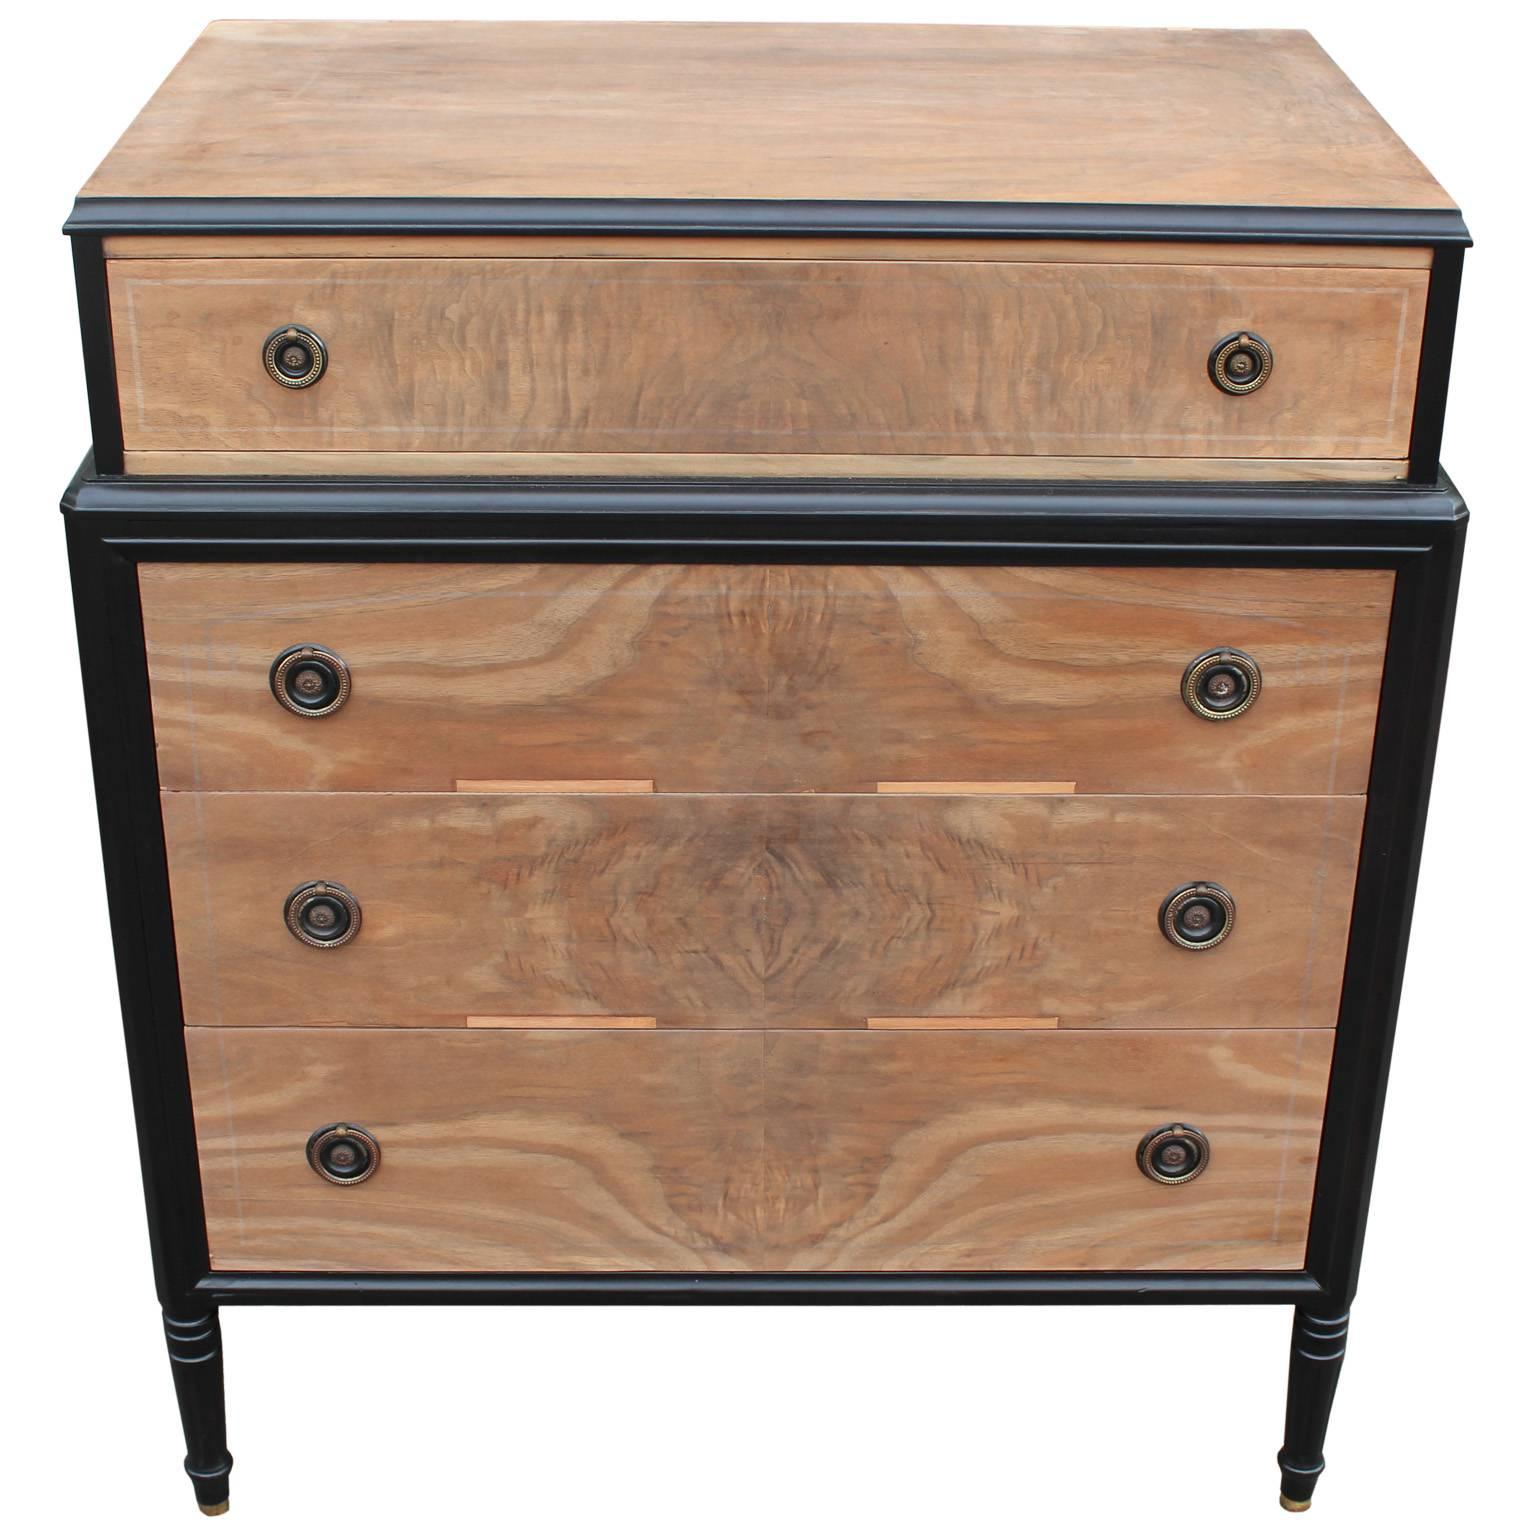 Beautiful natural walnut Victorian bespoke dresser with black accents. The four-drawer fronts have a stunning matched grain. Brass hardware has a fabulous patina. Four drawers provide excellent storage. Would be perfect in a traditional, Hollywood